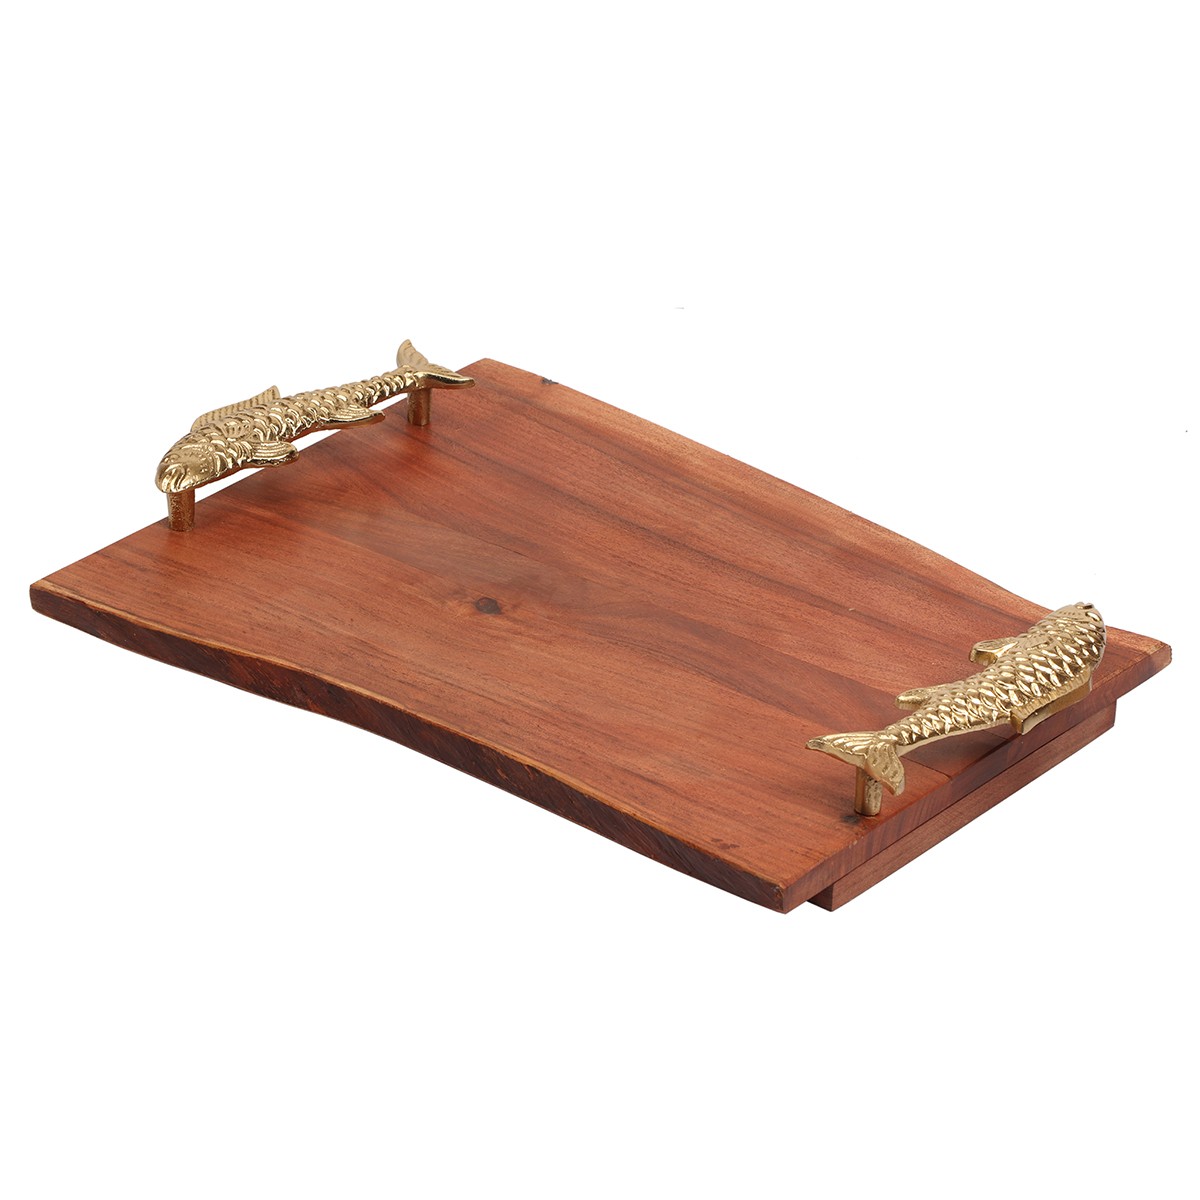 Fish Shaped Handle Wooden Tray